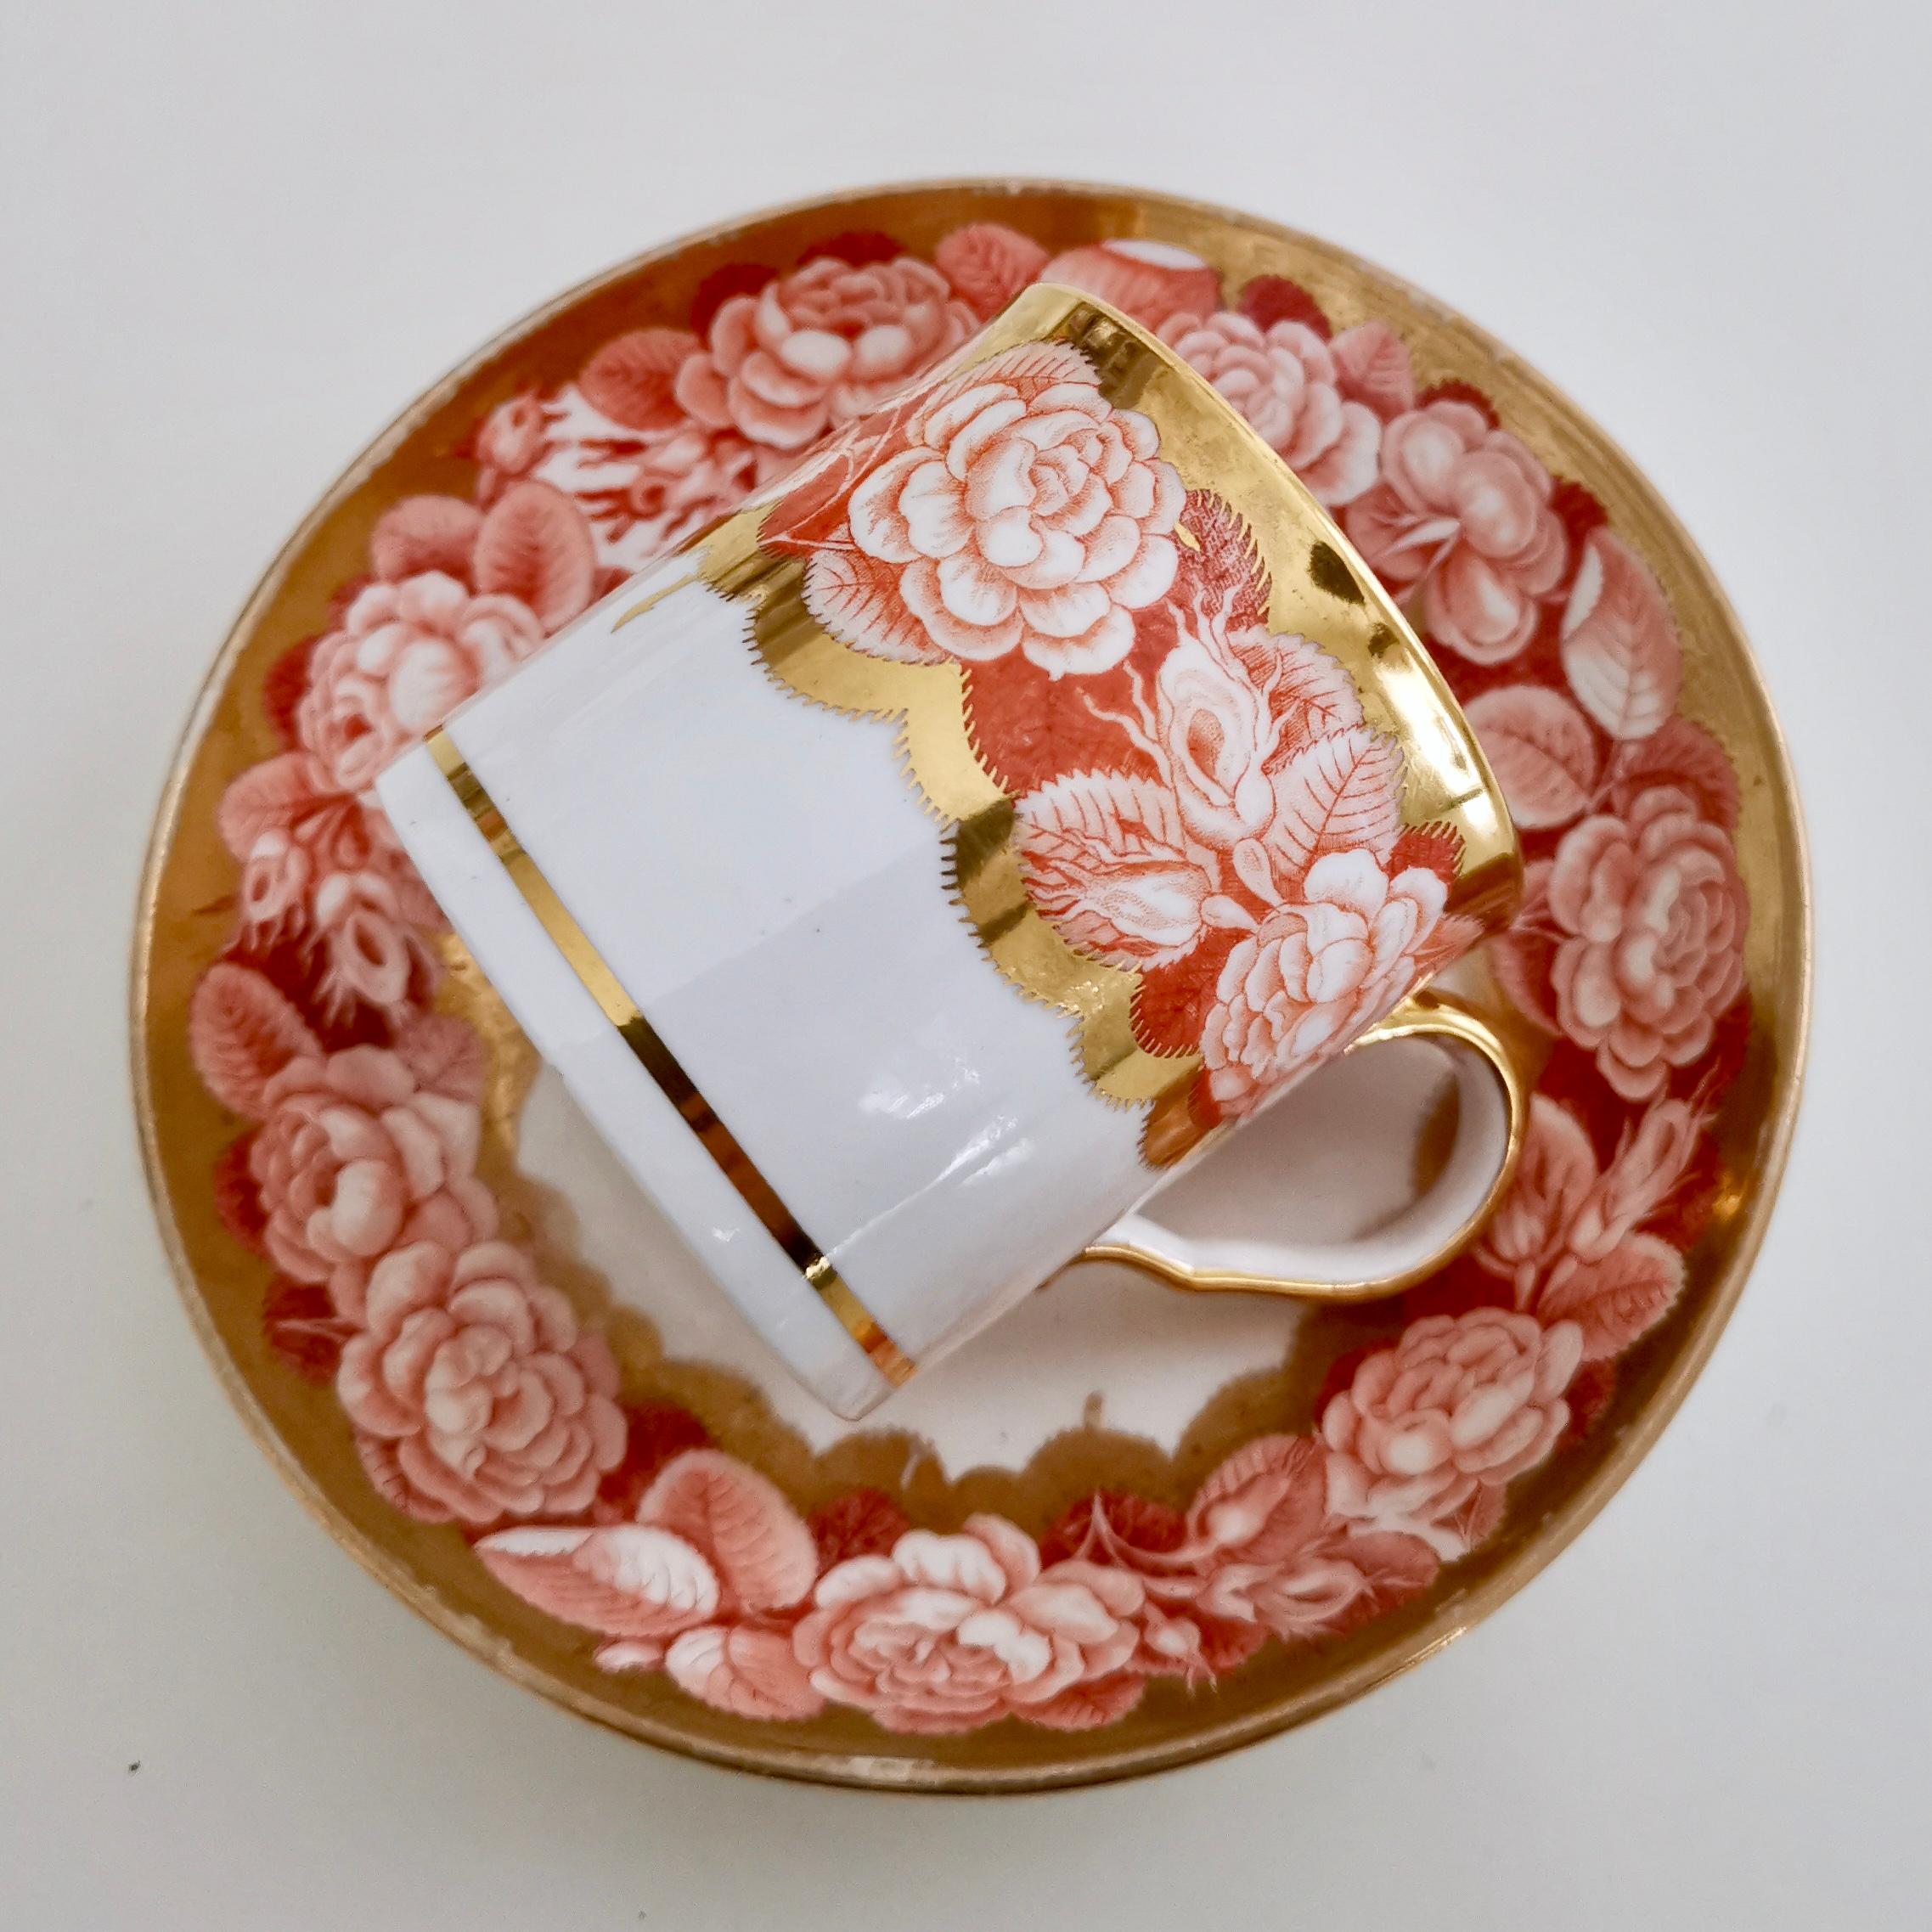 Spode Teacup Trio, Red Pluck and Dust Rose Border, Georgian, circa 1806 5